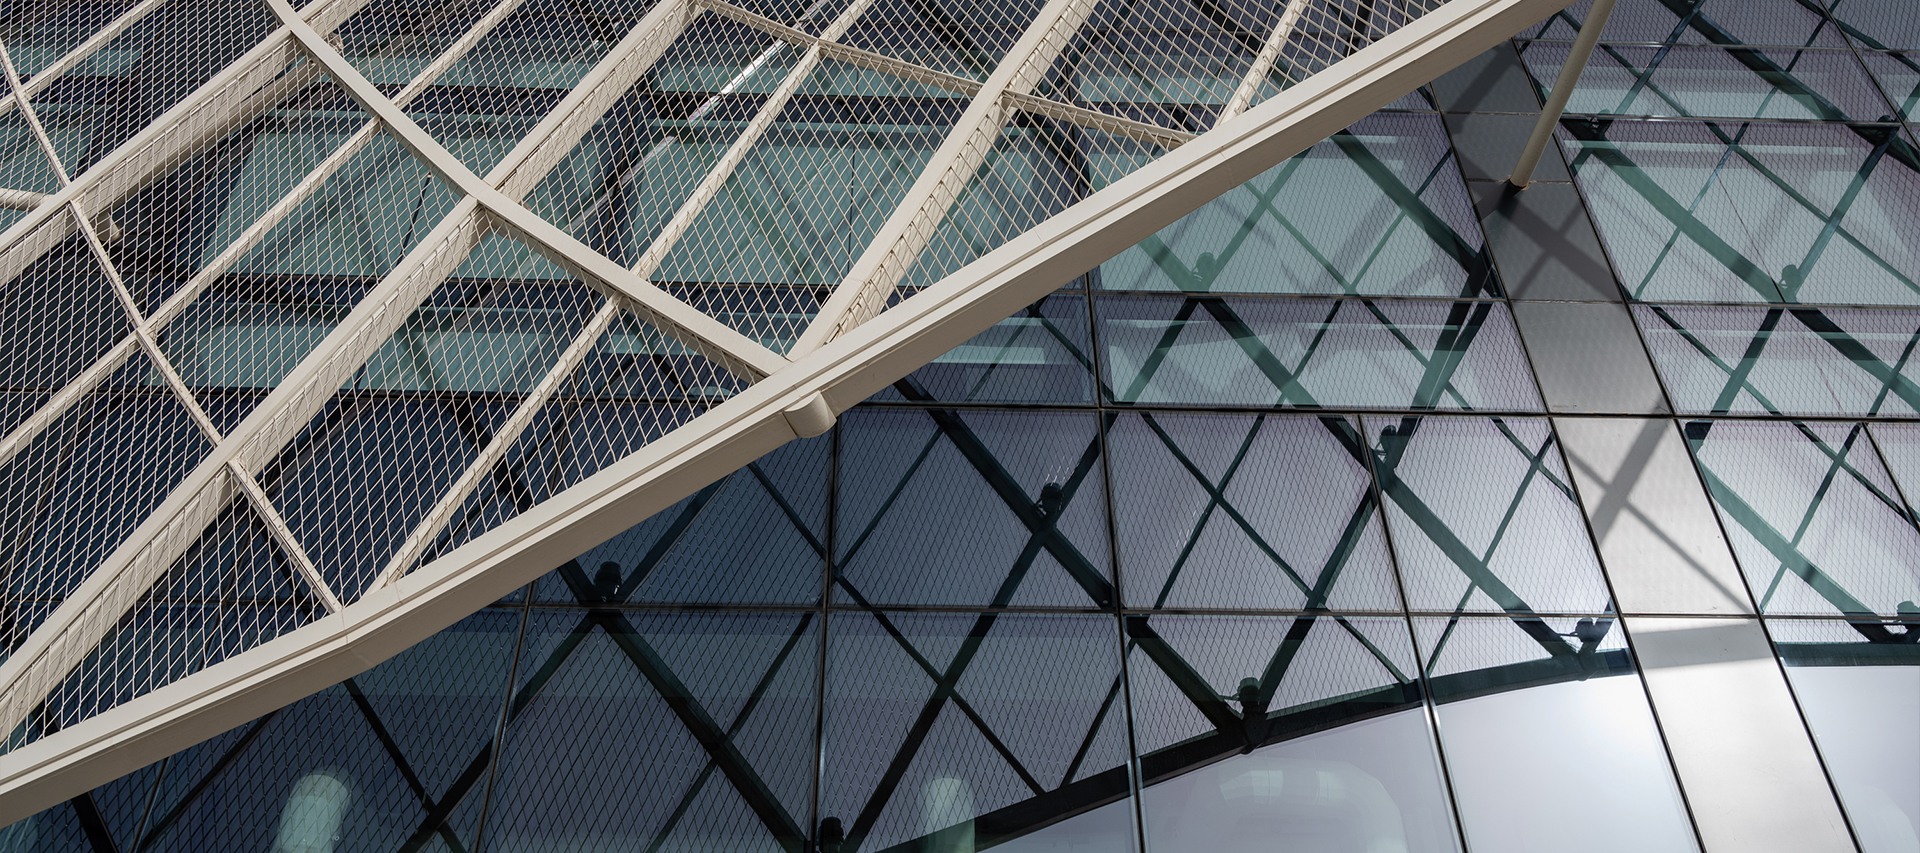 Modern architecture glass roof with curved design of steel structure